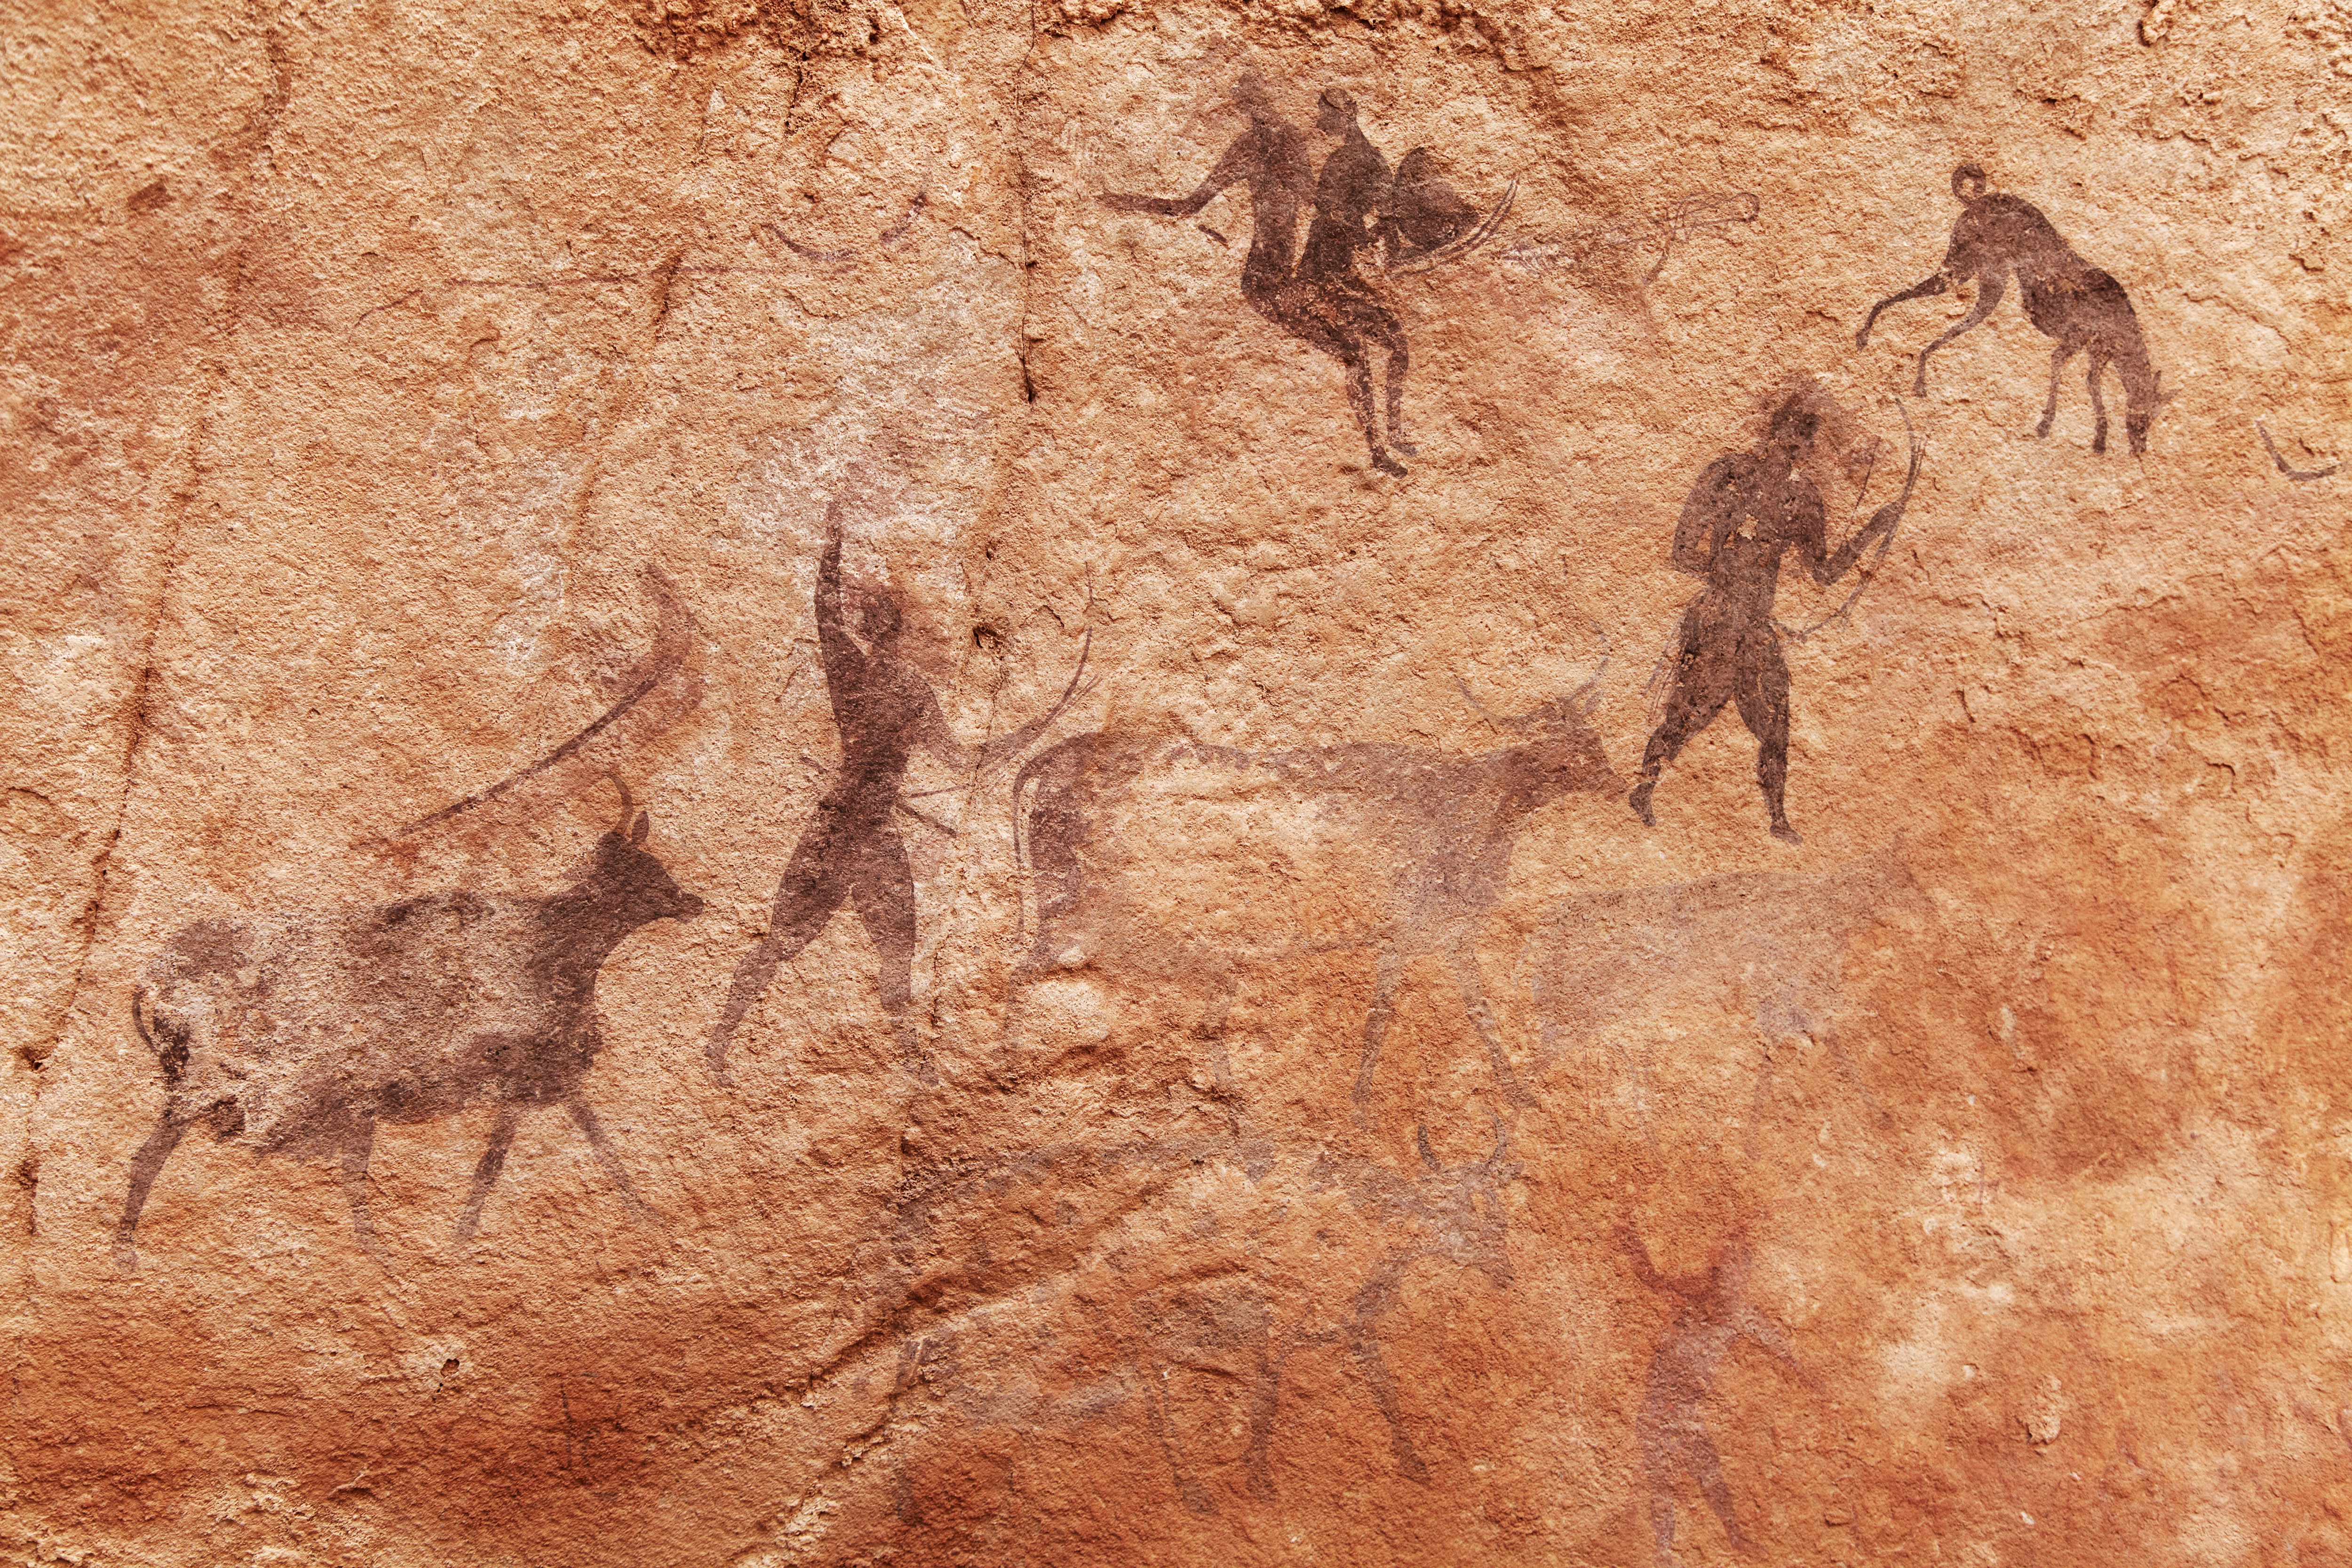 A rock painting from Tassili N'Ajjer, Algeria, showing prehistoric life.